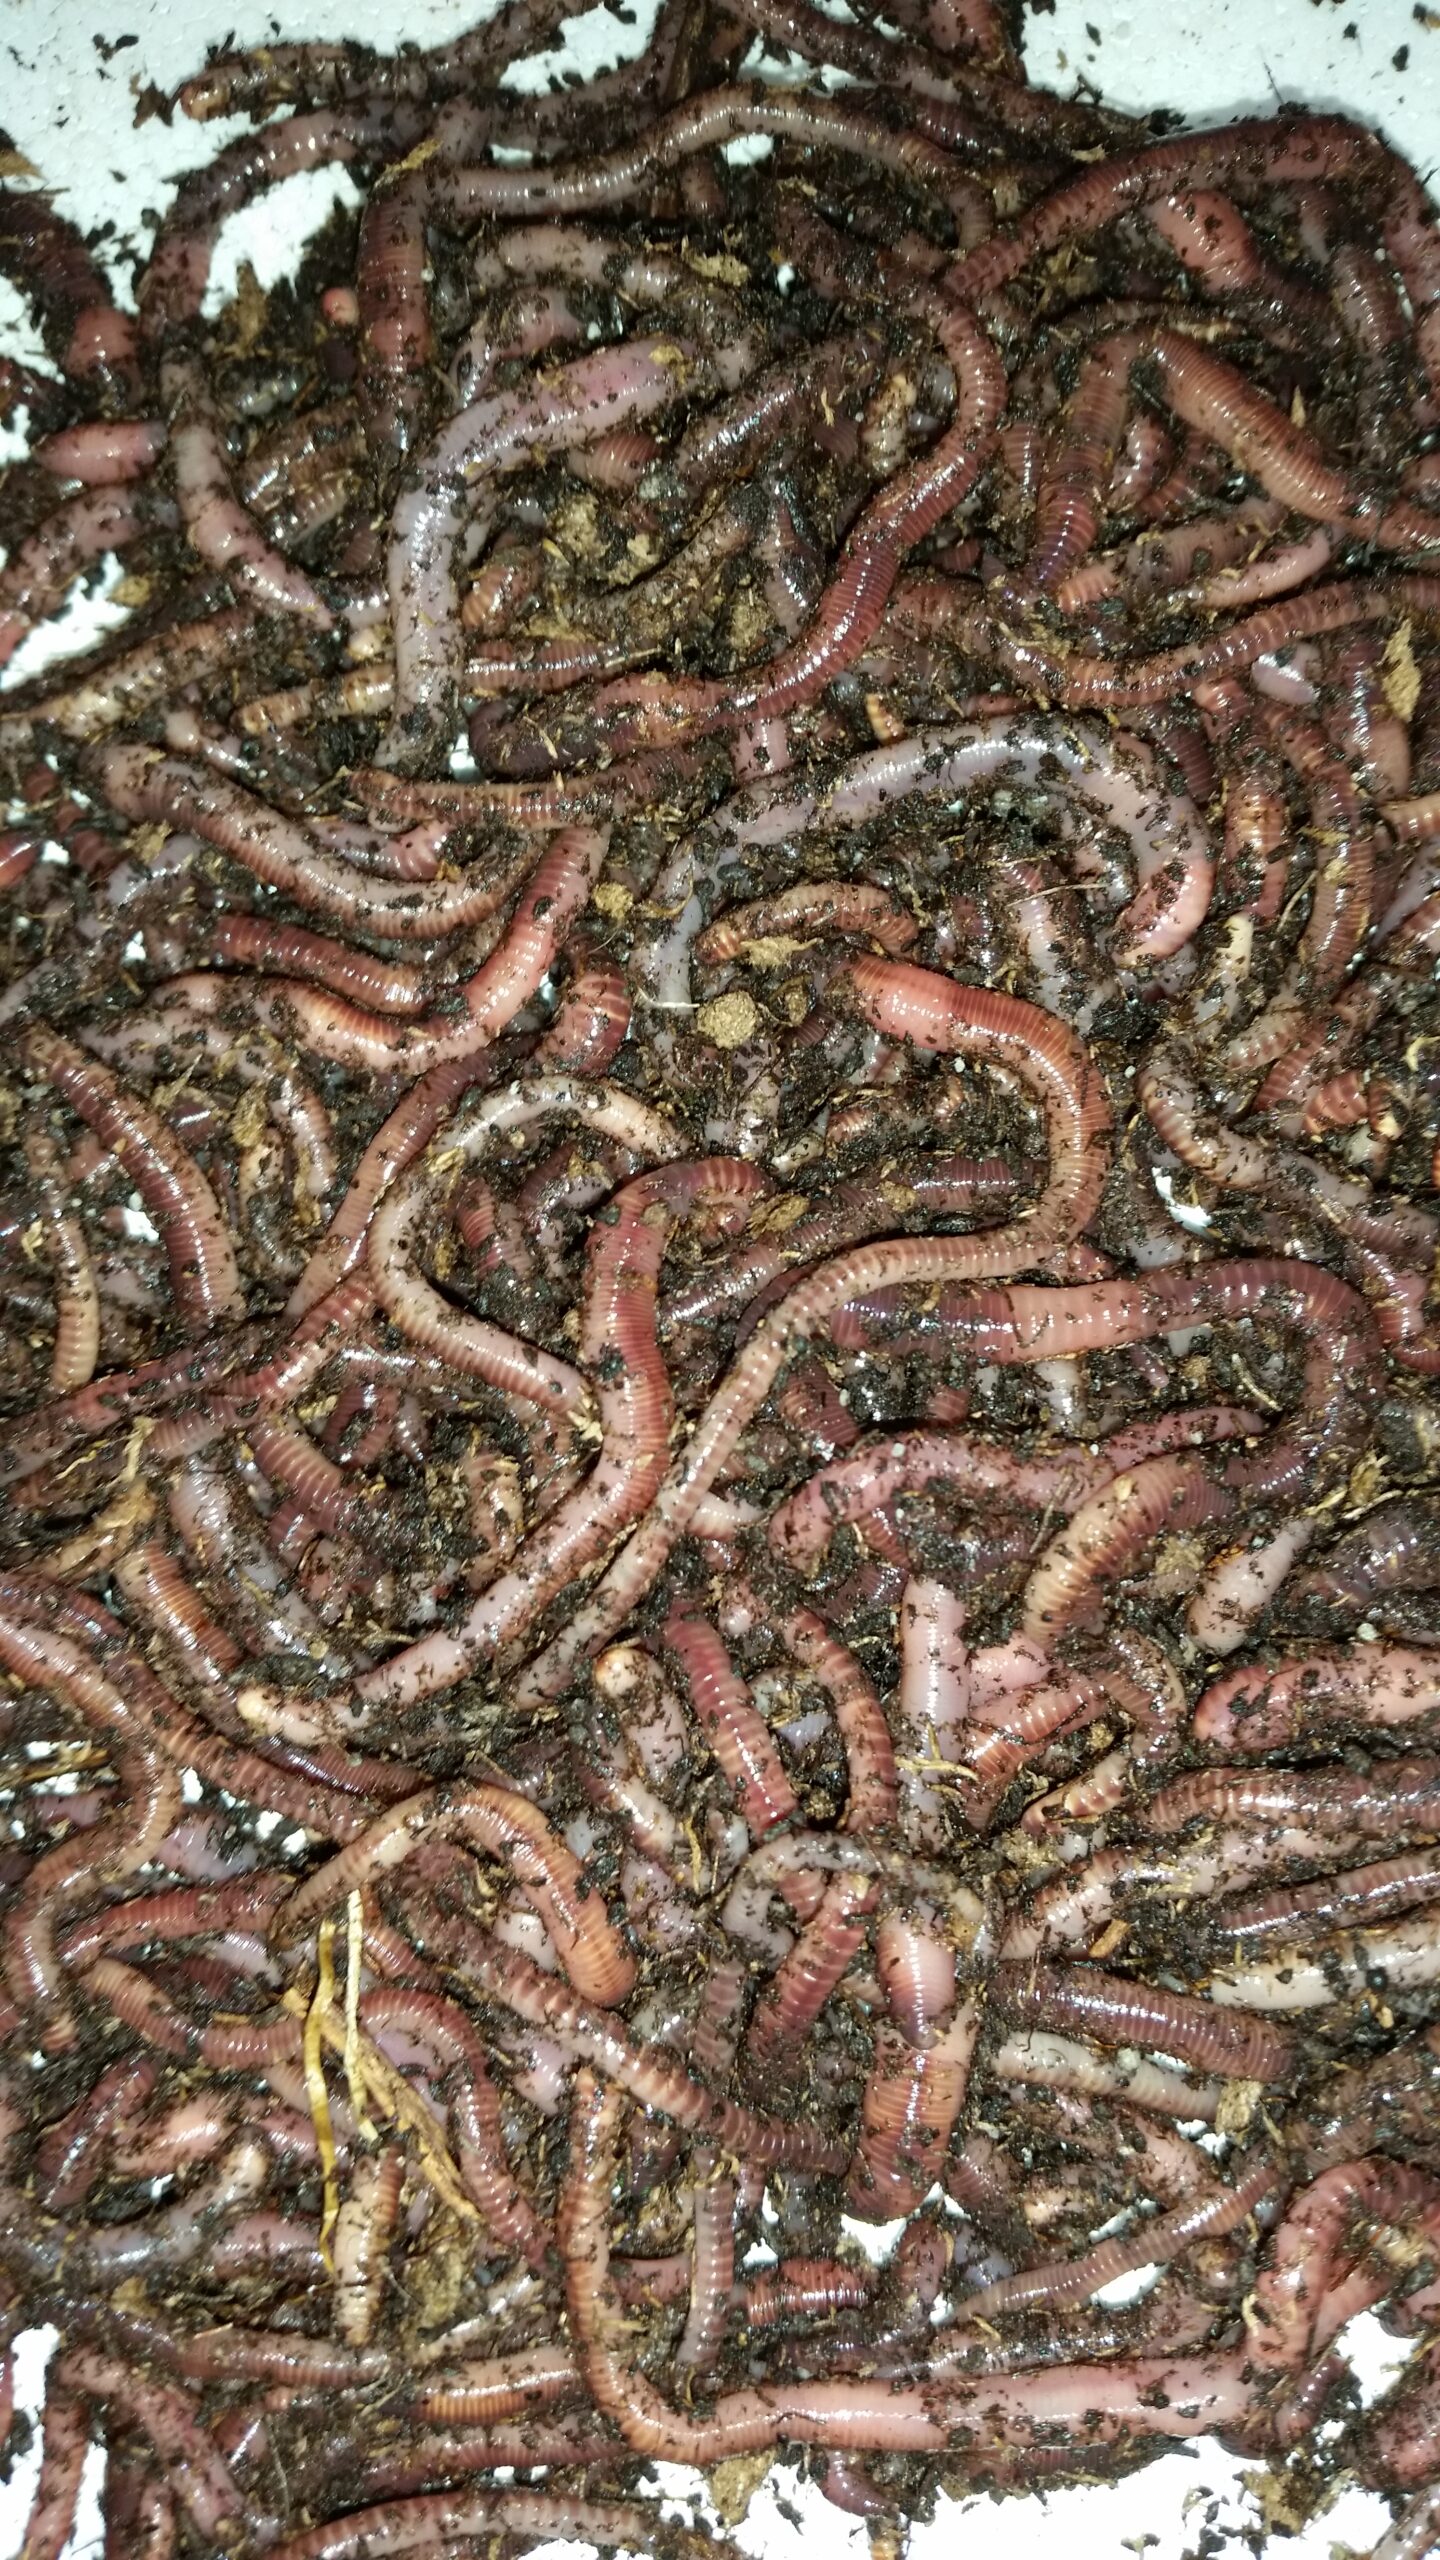  BESTBAIT 1 LB. European Nightcrawlers Approx. 250-300 Count  Composting Worms Fishing Worms : Pet Supplies